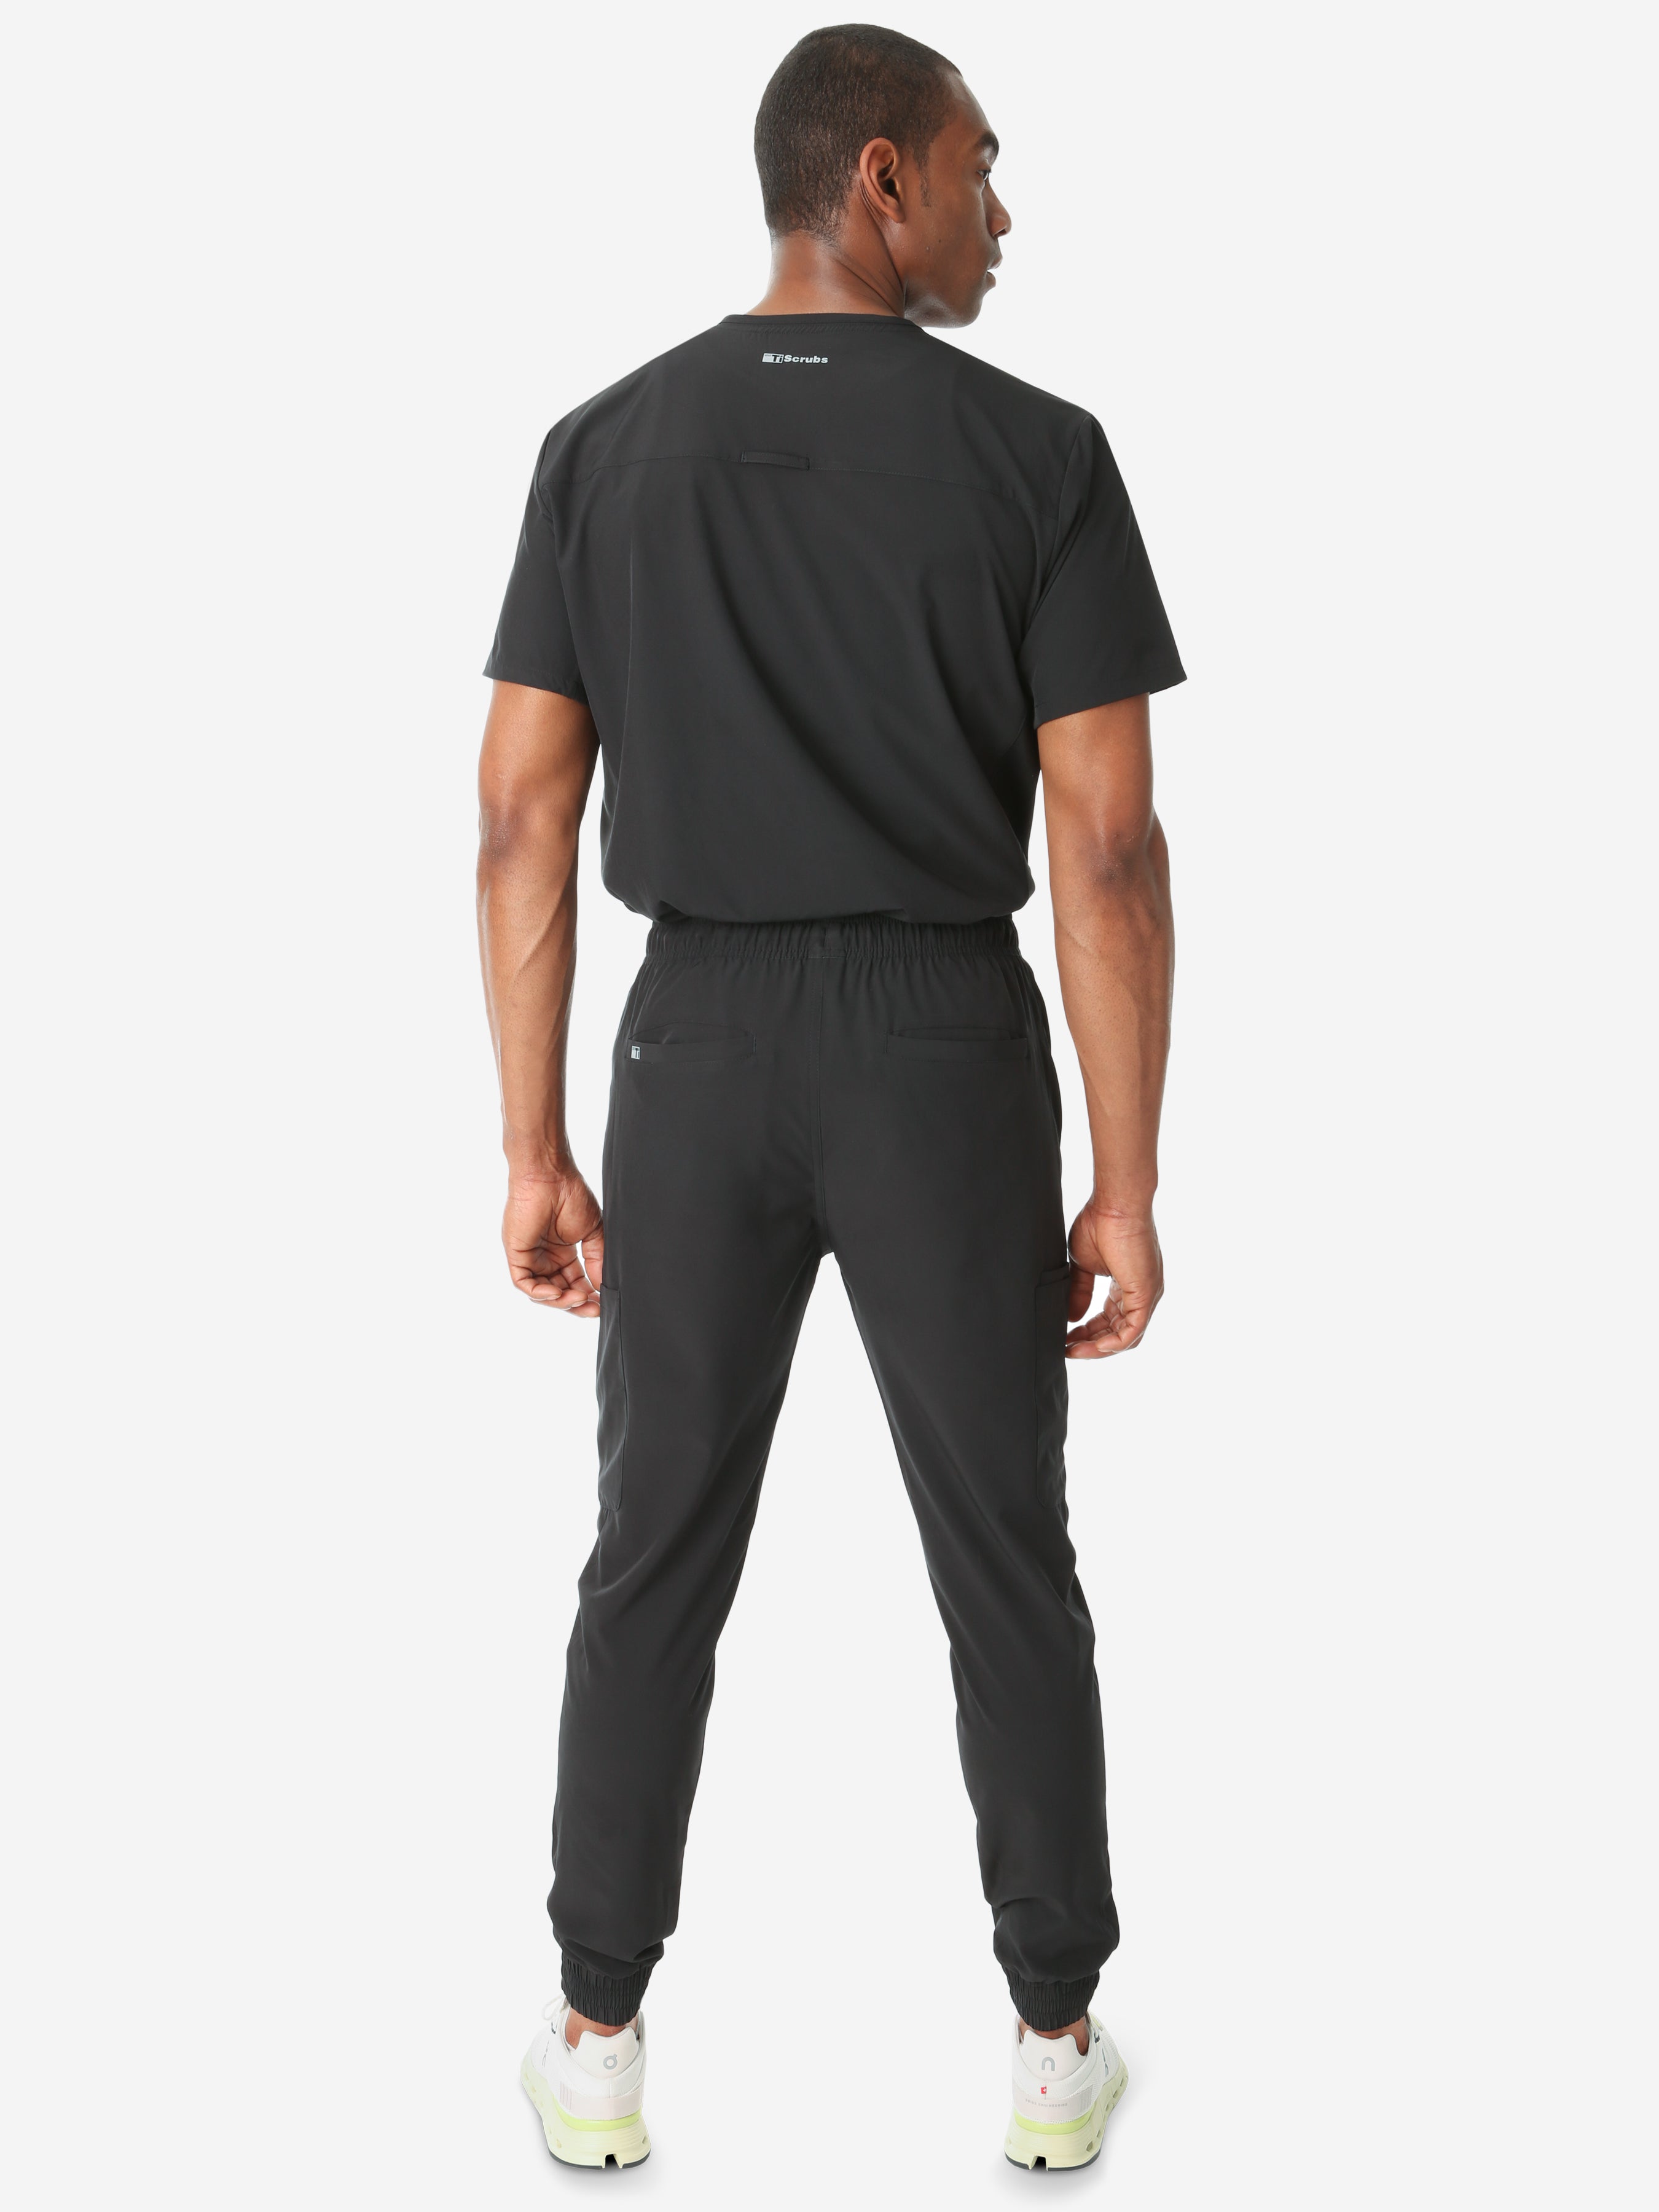 TiScrubs Stretch Real Black Jogger Scrub Pants and Double Pocket Top Tucked Full Body Back